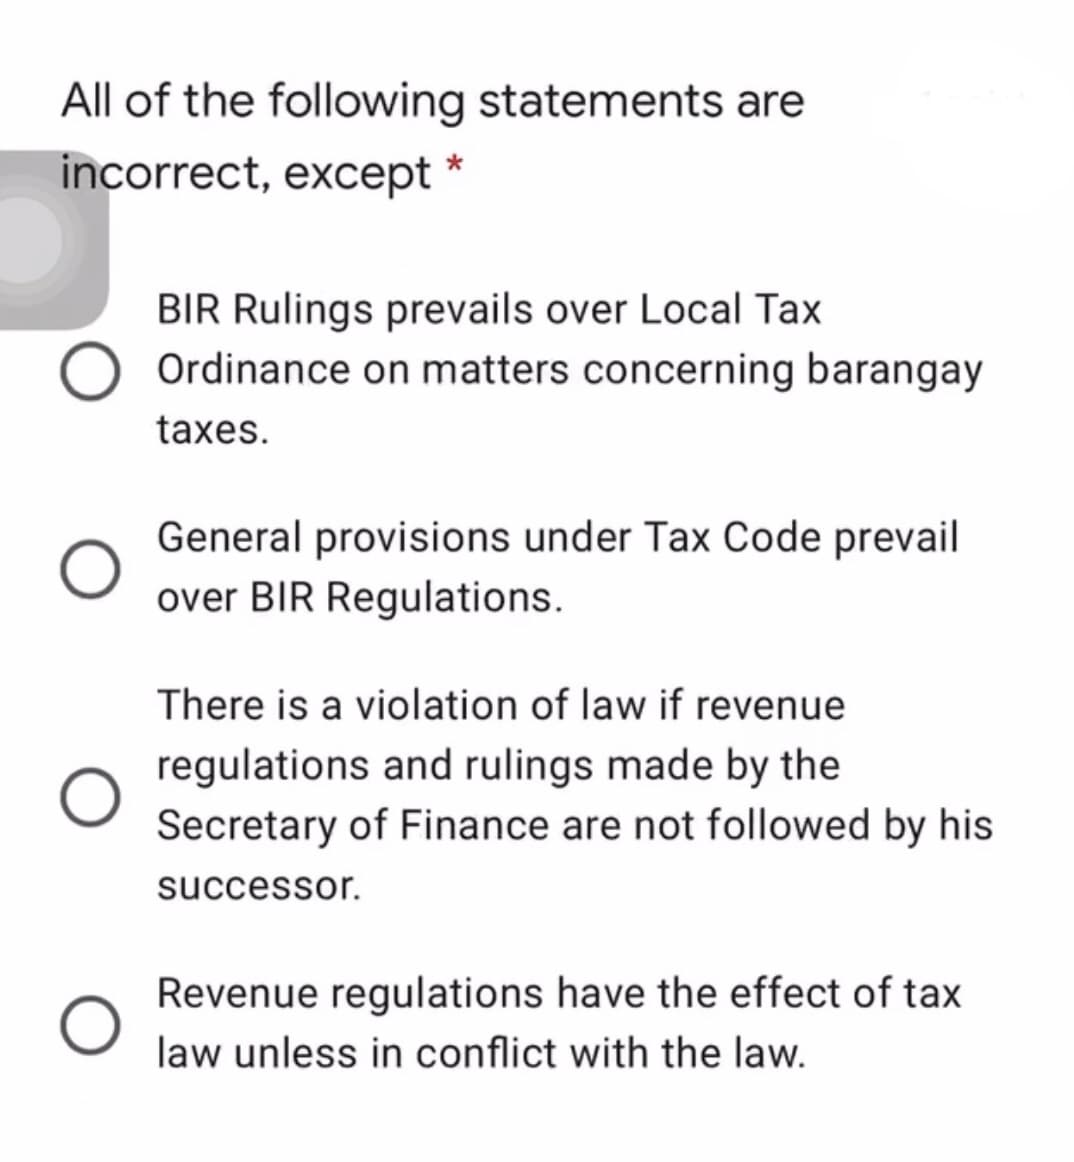 All of the following statements are
incorrect, except
BIR Rulings prevails over Local Tax
Ordinance on matters concerning barangay
taxes.
General provisions under Tax Code prevail
over BIR Regulations.
There is a violation of law if revenue
regulations and rulings made by the
Secretary of Finance are not followed by his
successor.
Revenue regulations have the effect of tax
law unless in conflict with the law.
